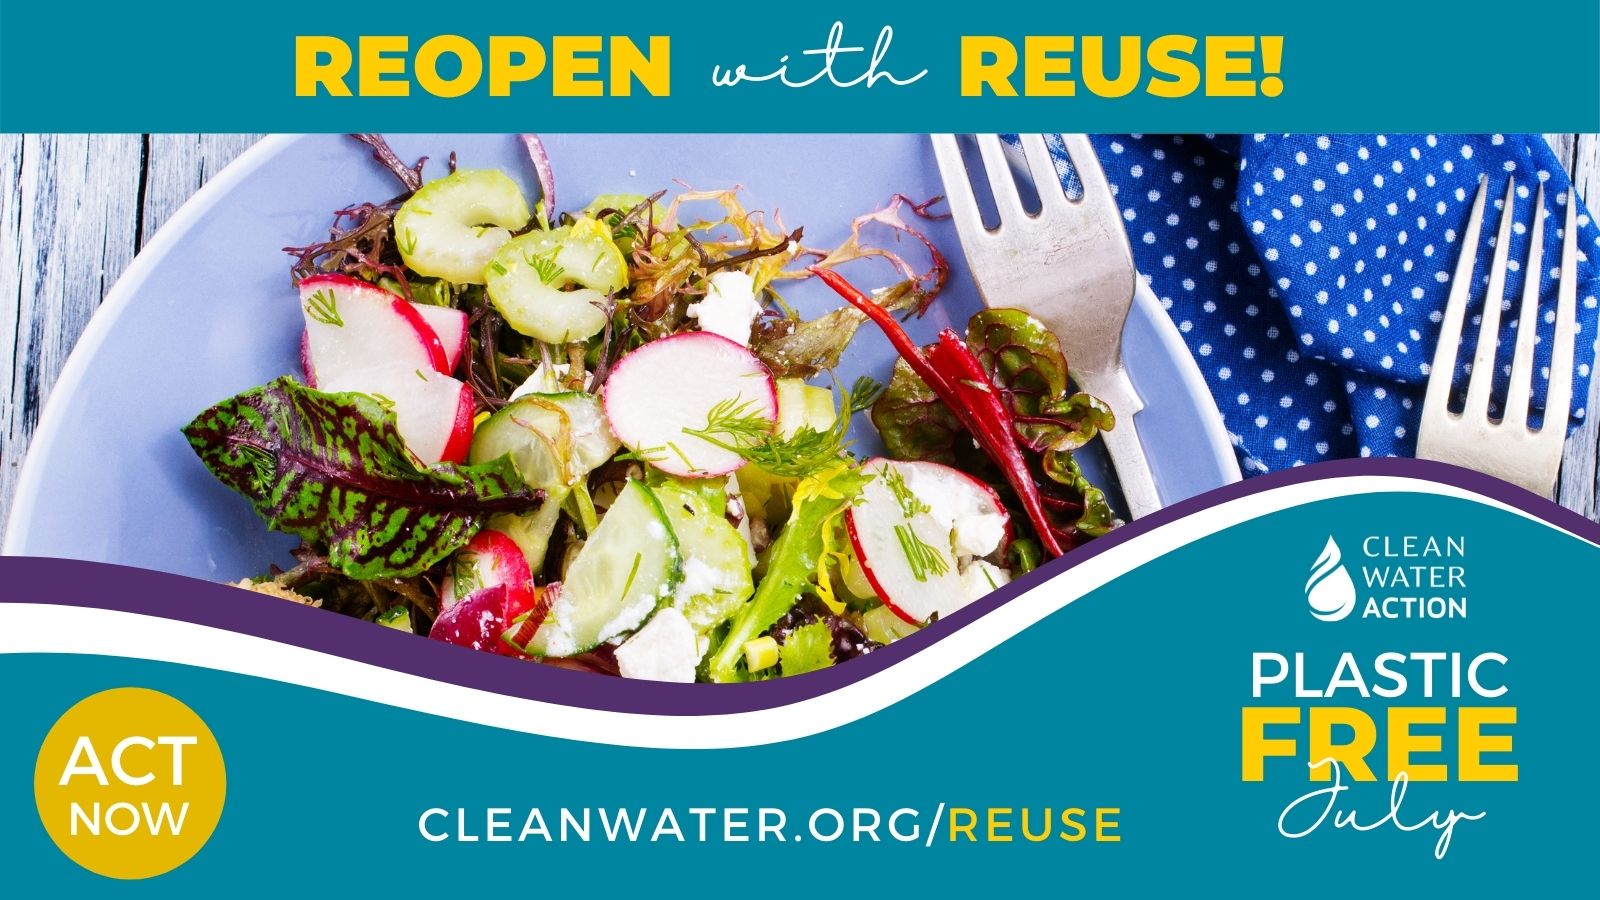 National Plastic Free July Reopen With Reuse